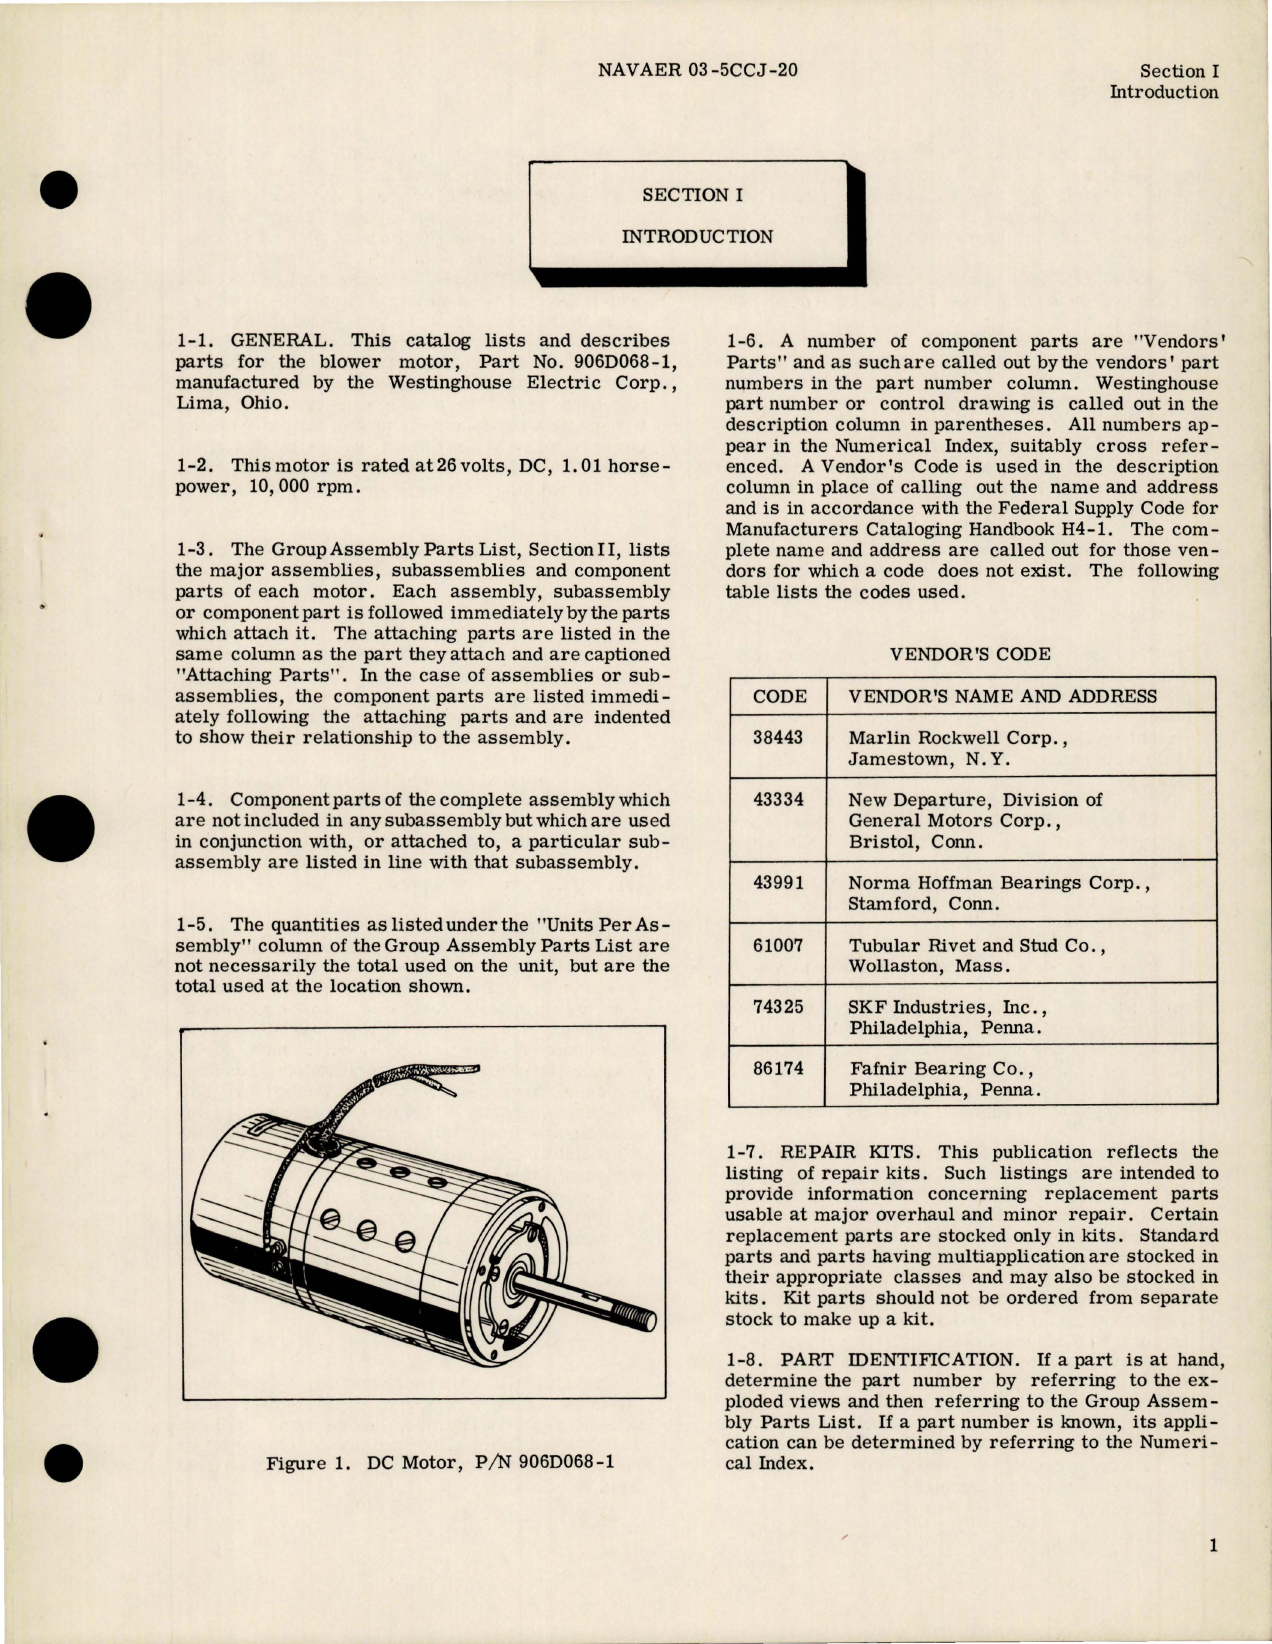 Sample page 5 from AirCorps Library document: Illustrated Parts Breakdown for DC Motor - Part 906D086-1